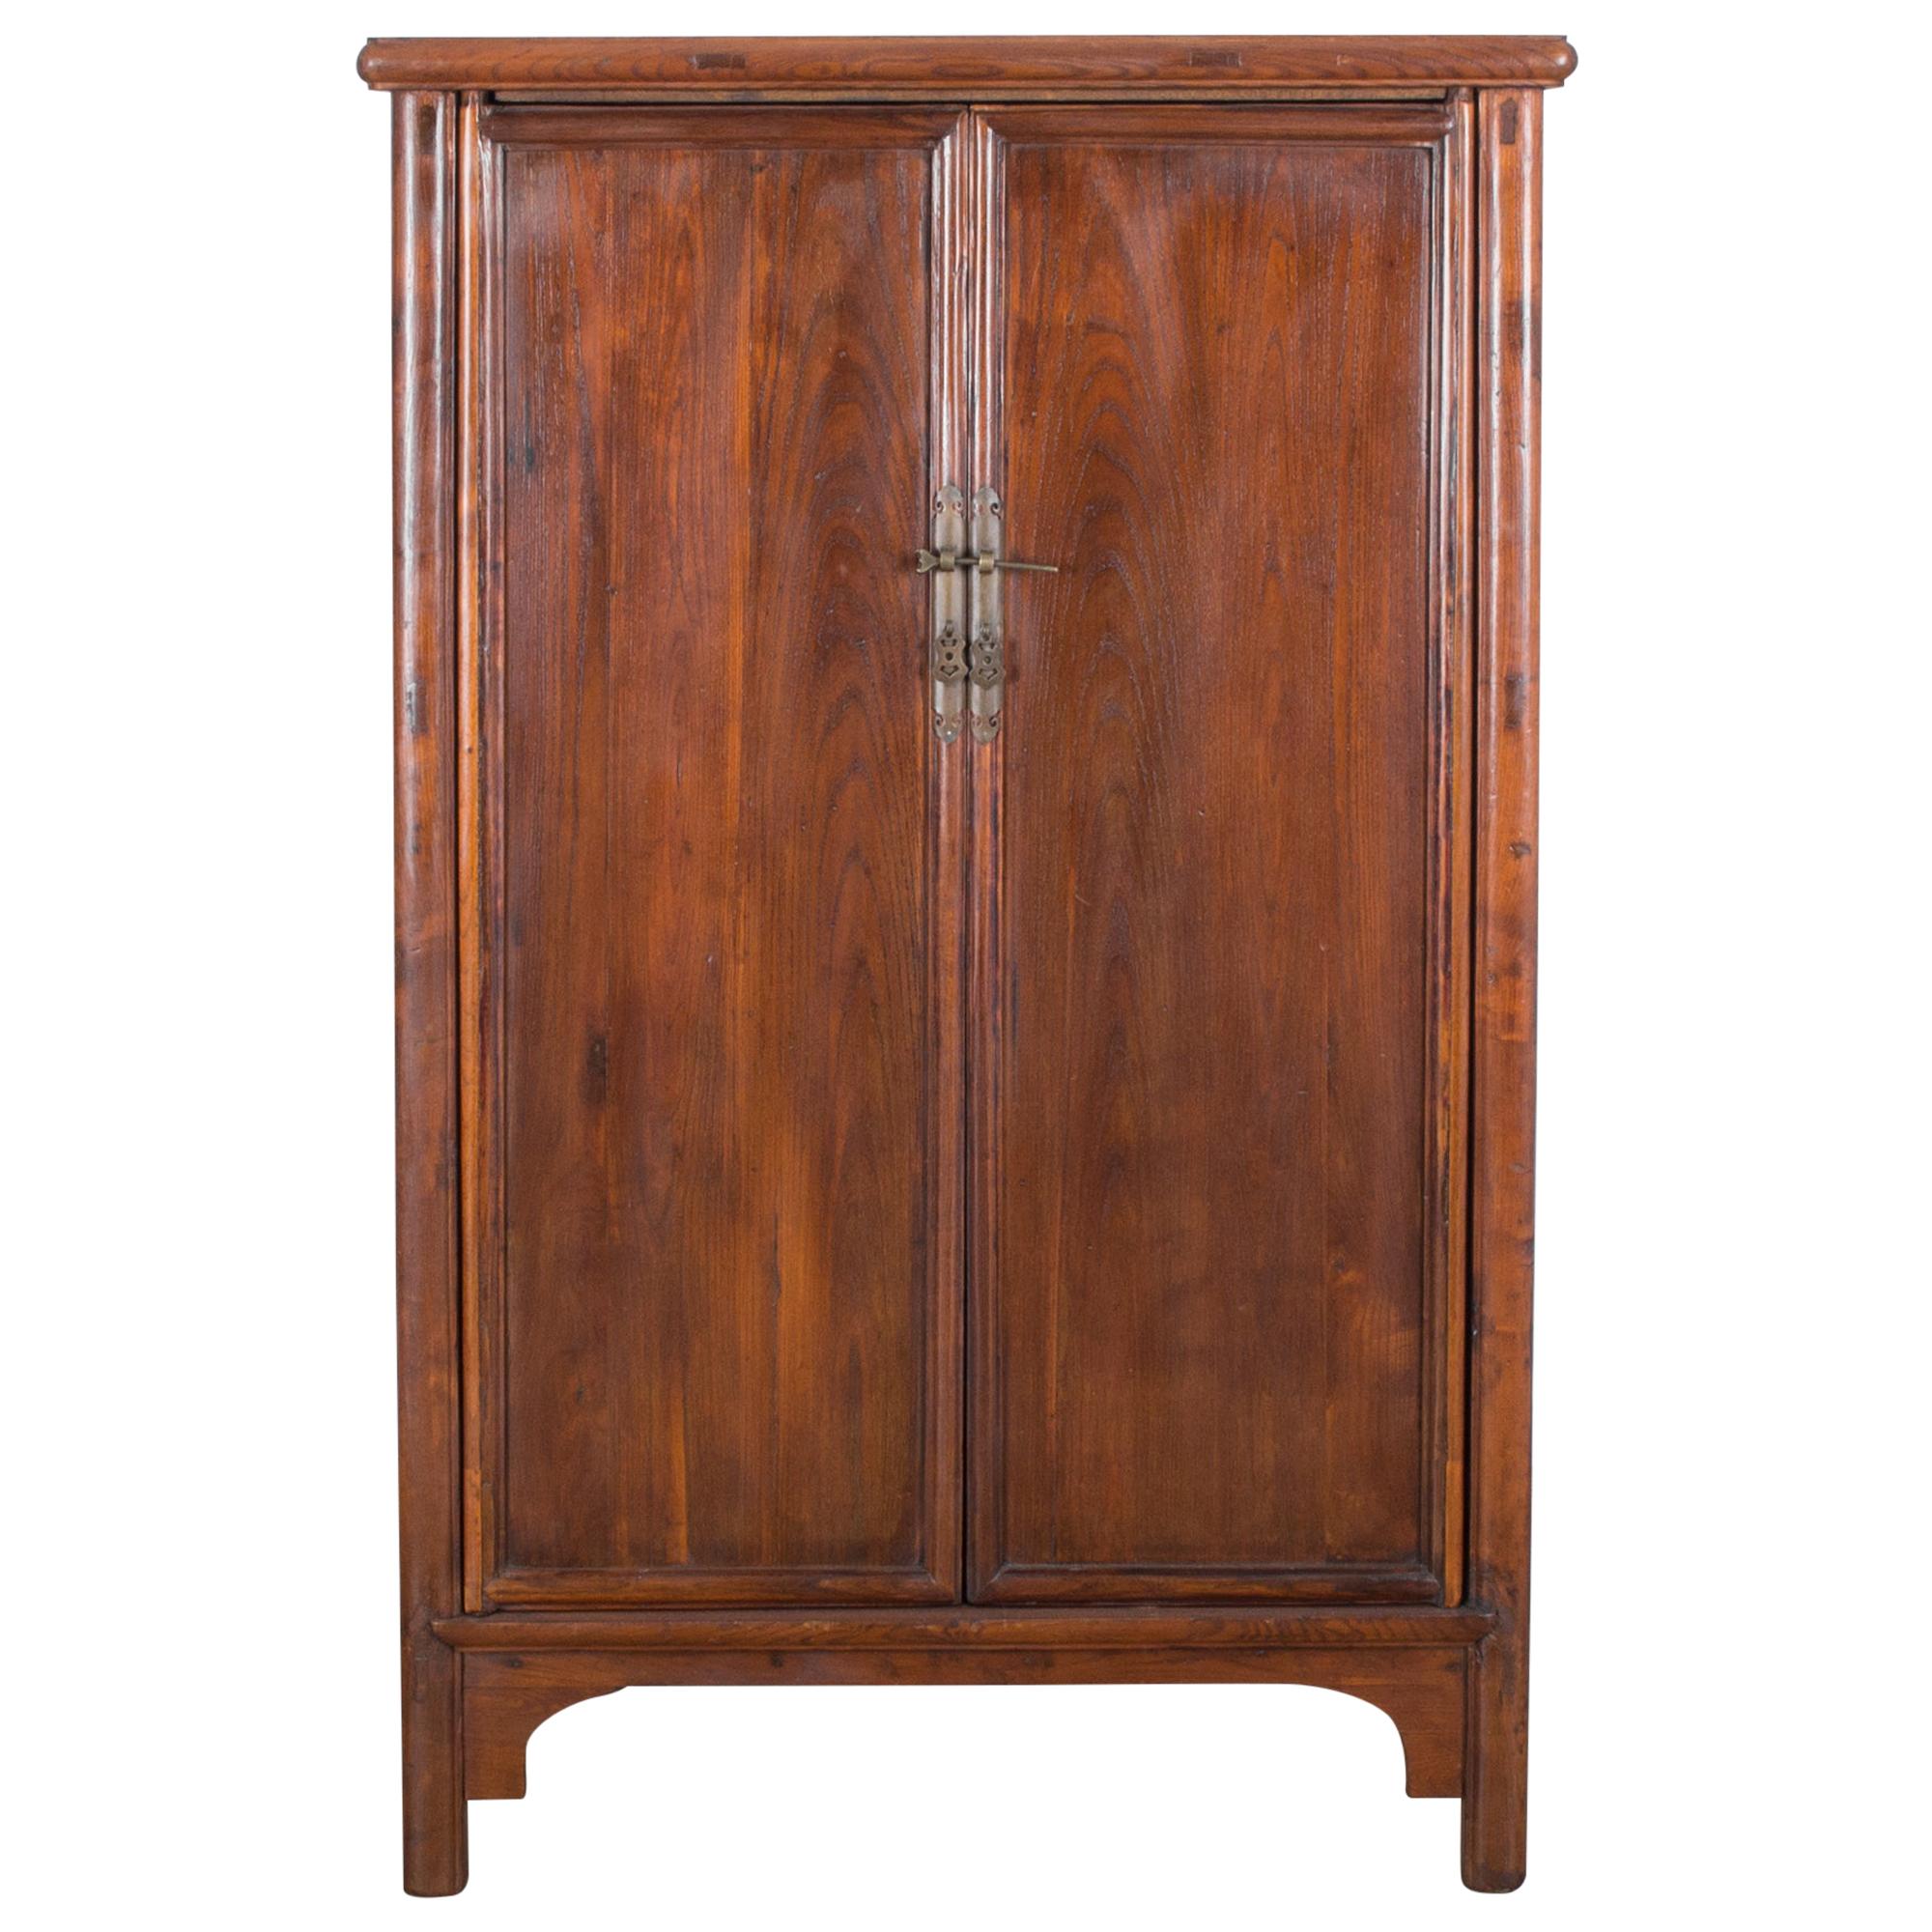 1900s Chinese Wooden Armoire